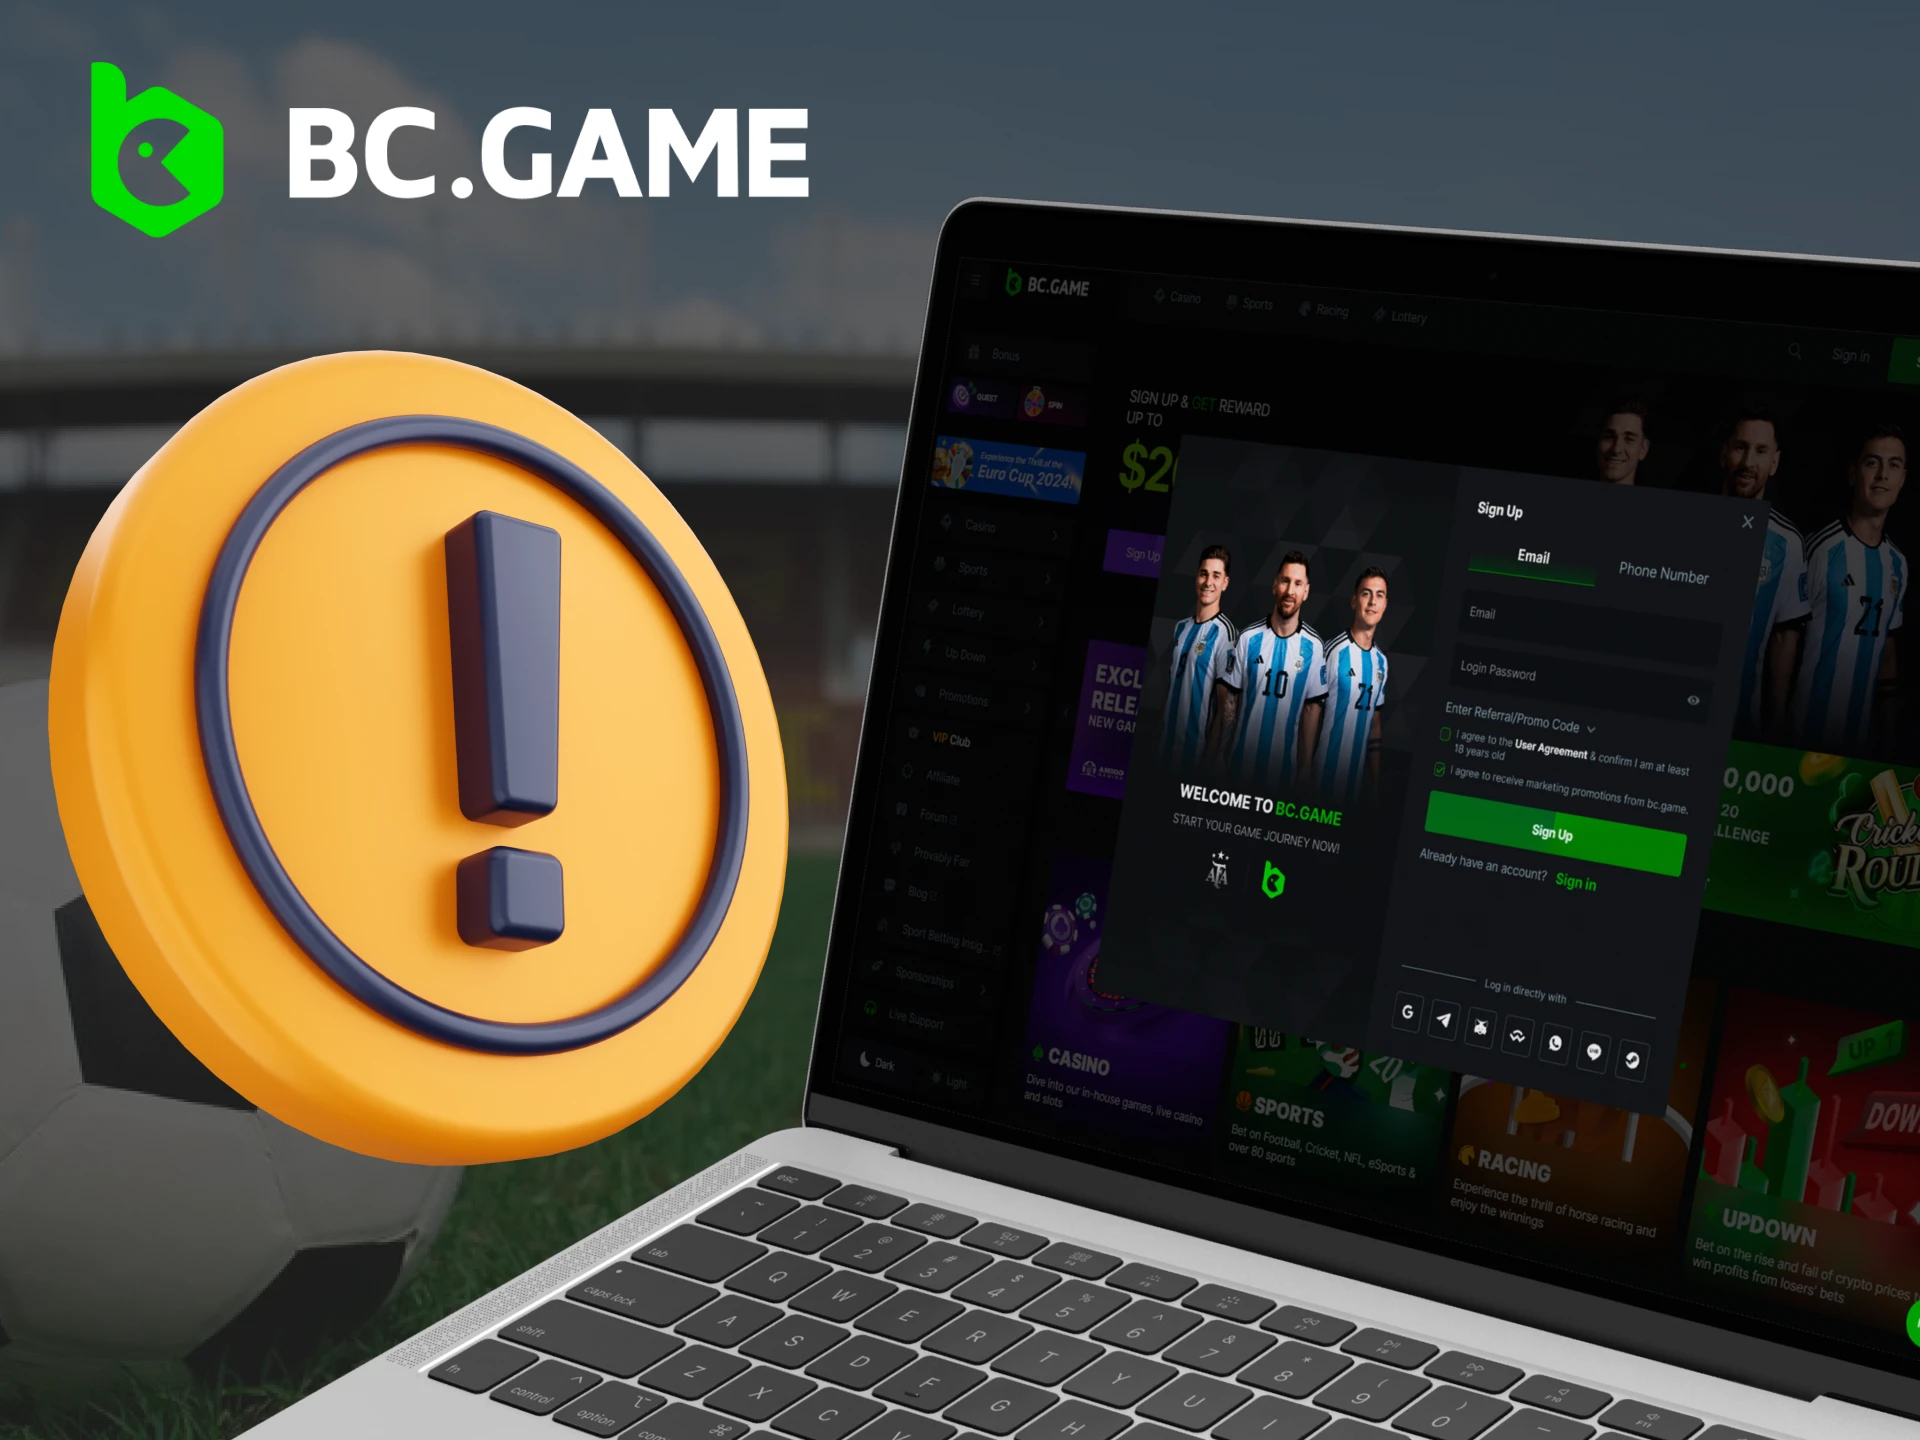 You may encounter these problems when registering with BC Game.